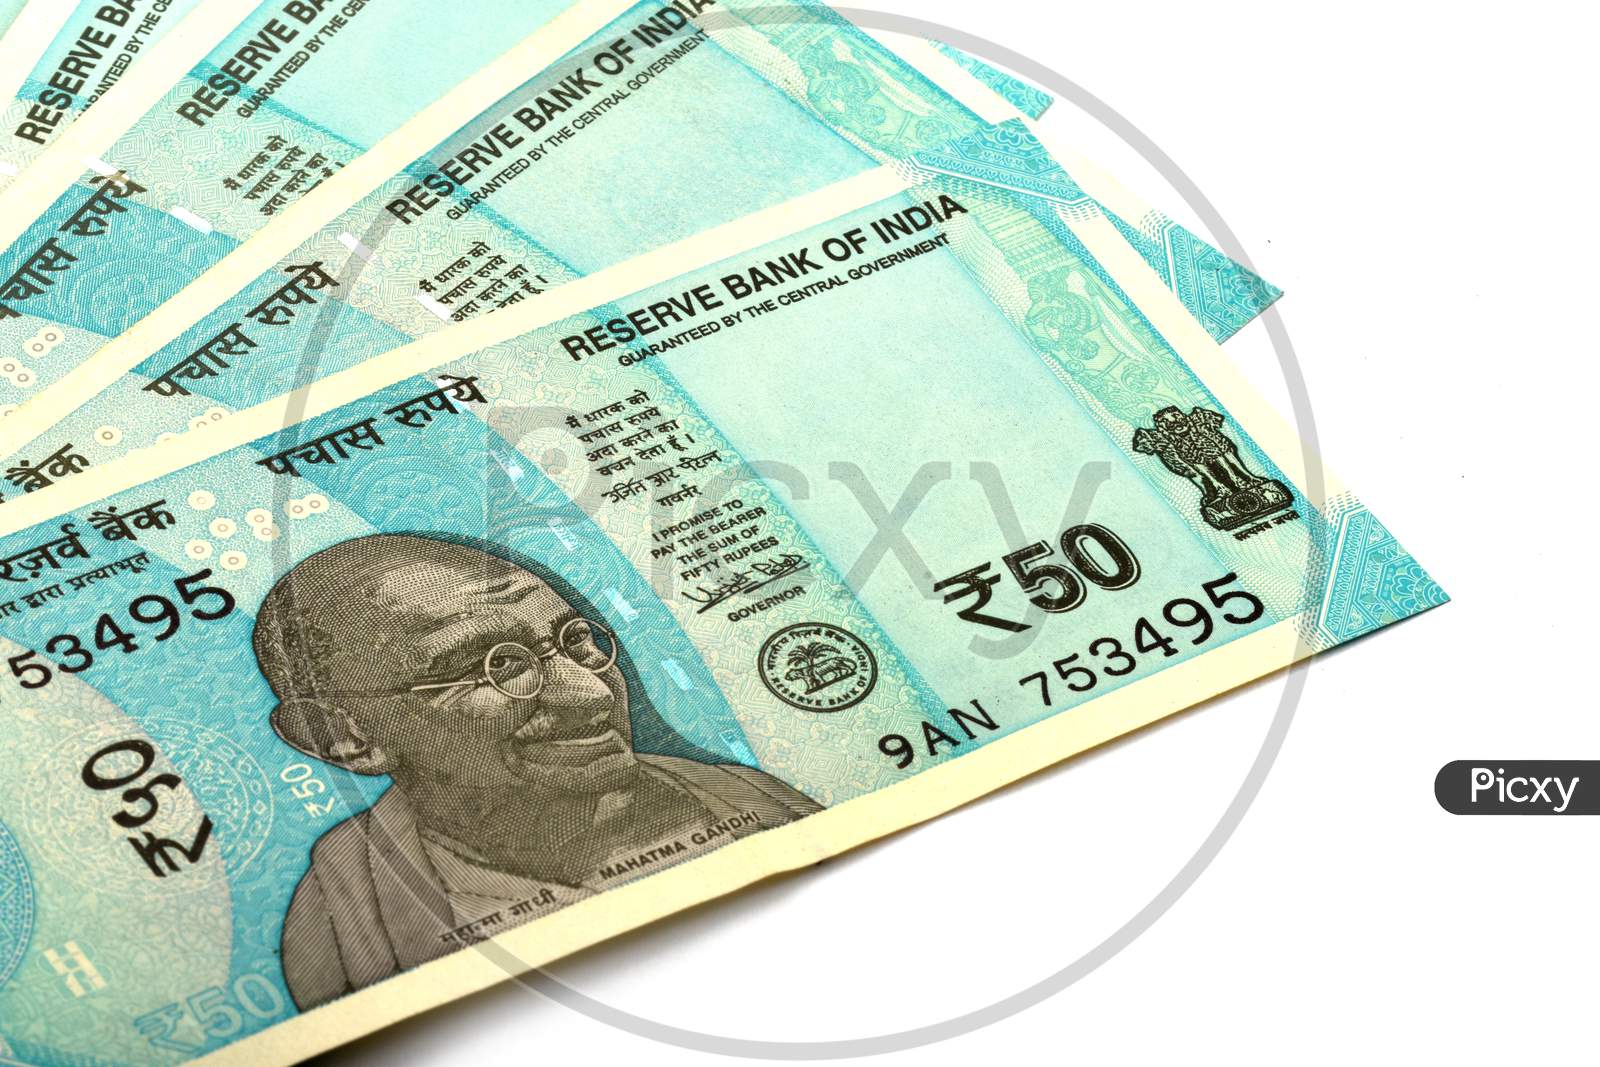 New Indian Currency Of 50 Rupee Note On White Isolated Background, Indian Currency, Rupee, Indian Rupee,Indian Money